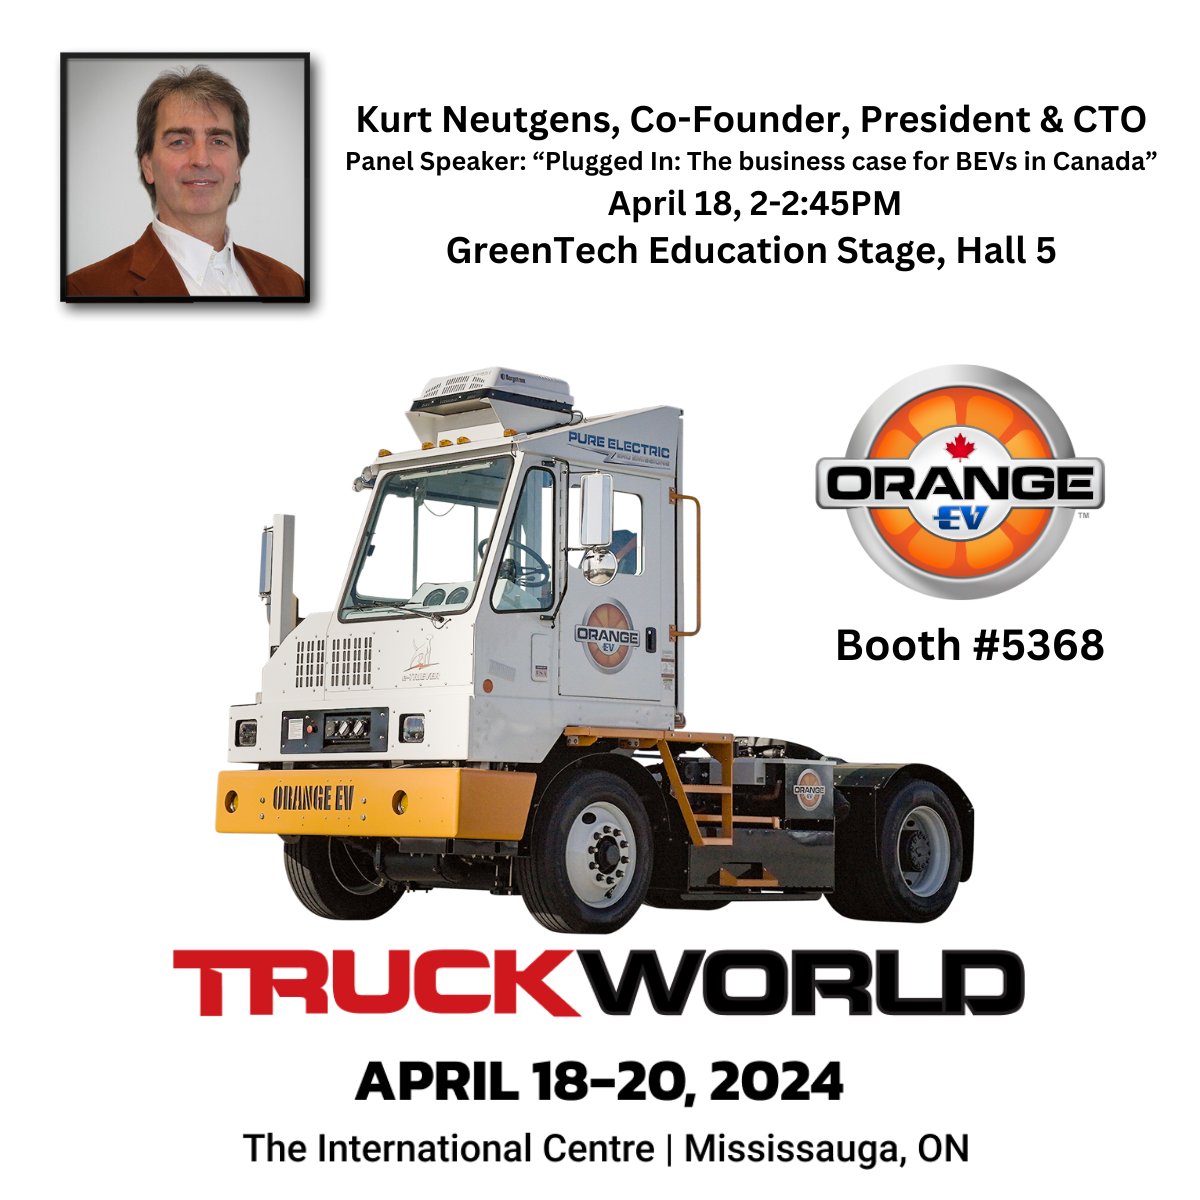 Feel the energy at Truck World, April 18-20 in Mississauga, ON! Visit Orange EV Canada at booth #5368 to tour our pure-electric e-TRIEVER®. Also, catch Kurt Neutgens, our President, and CTO speaking on a panel discussing the business case for commercial fleet electrification.